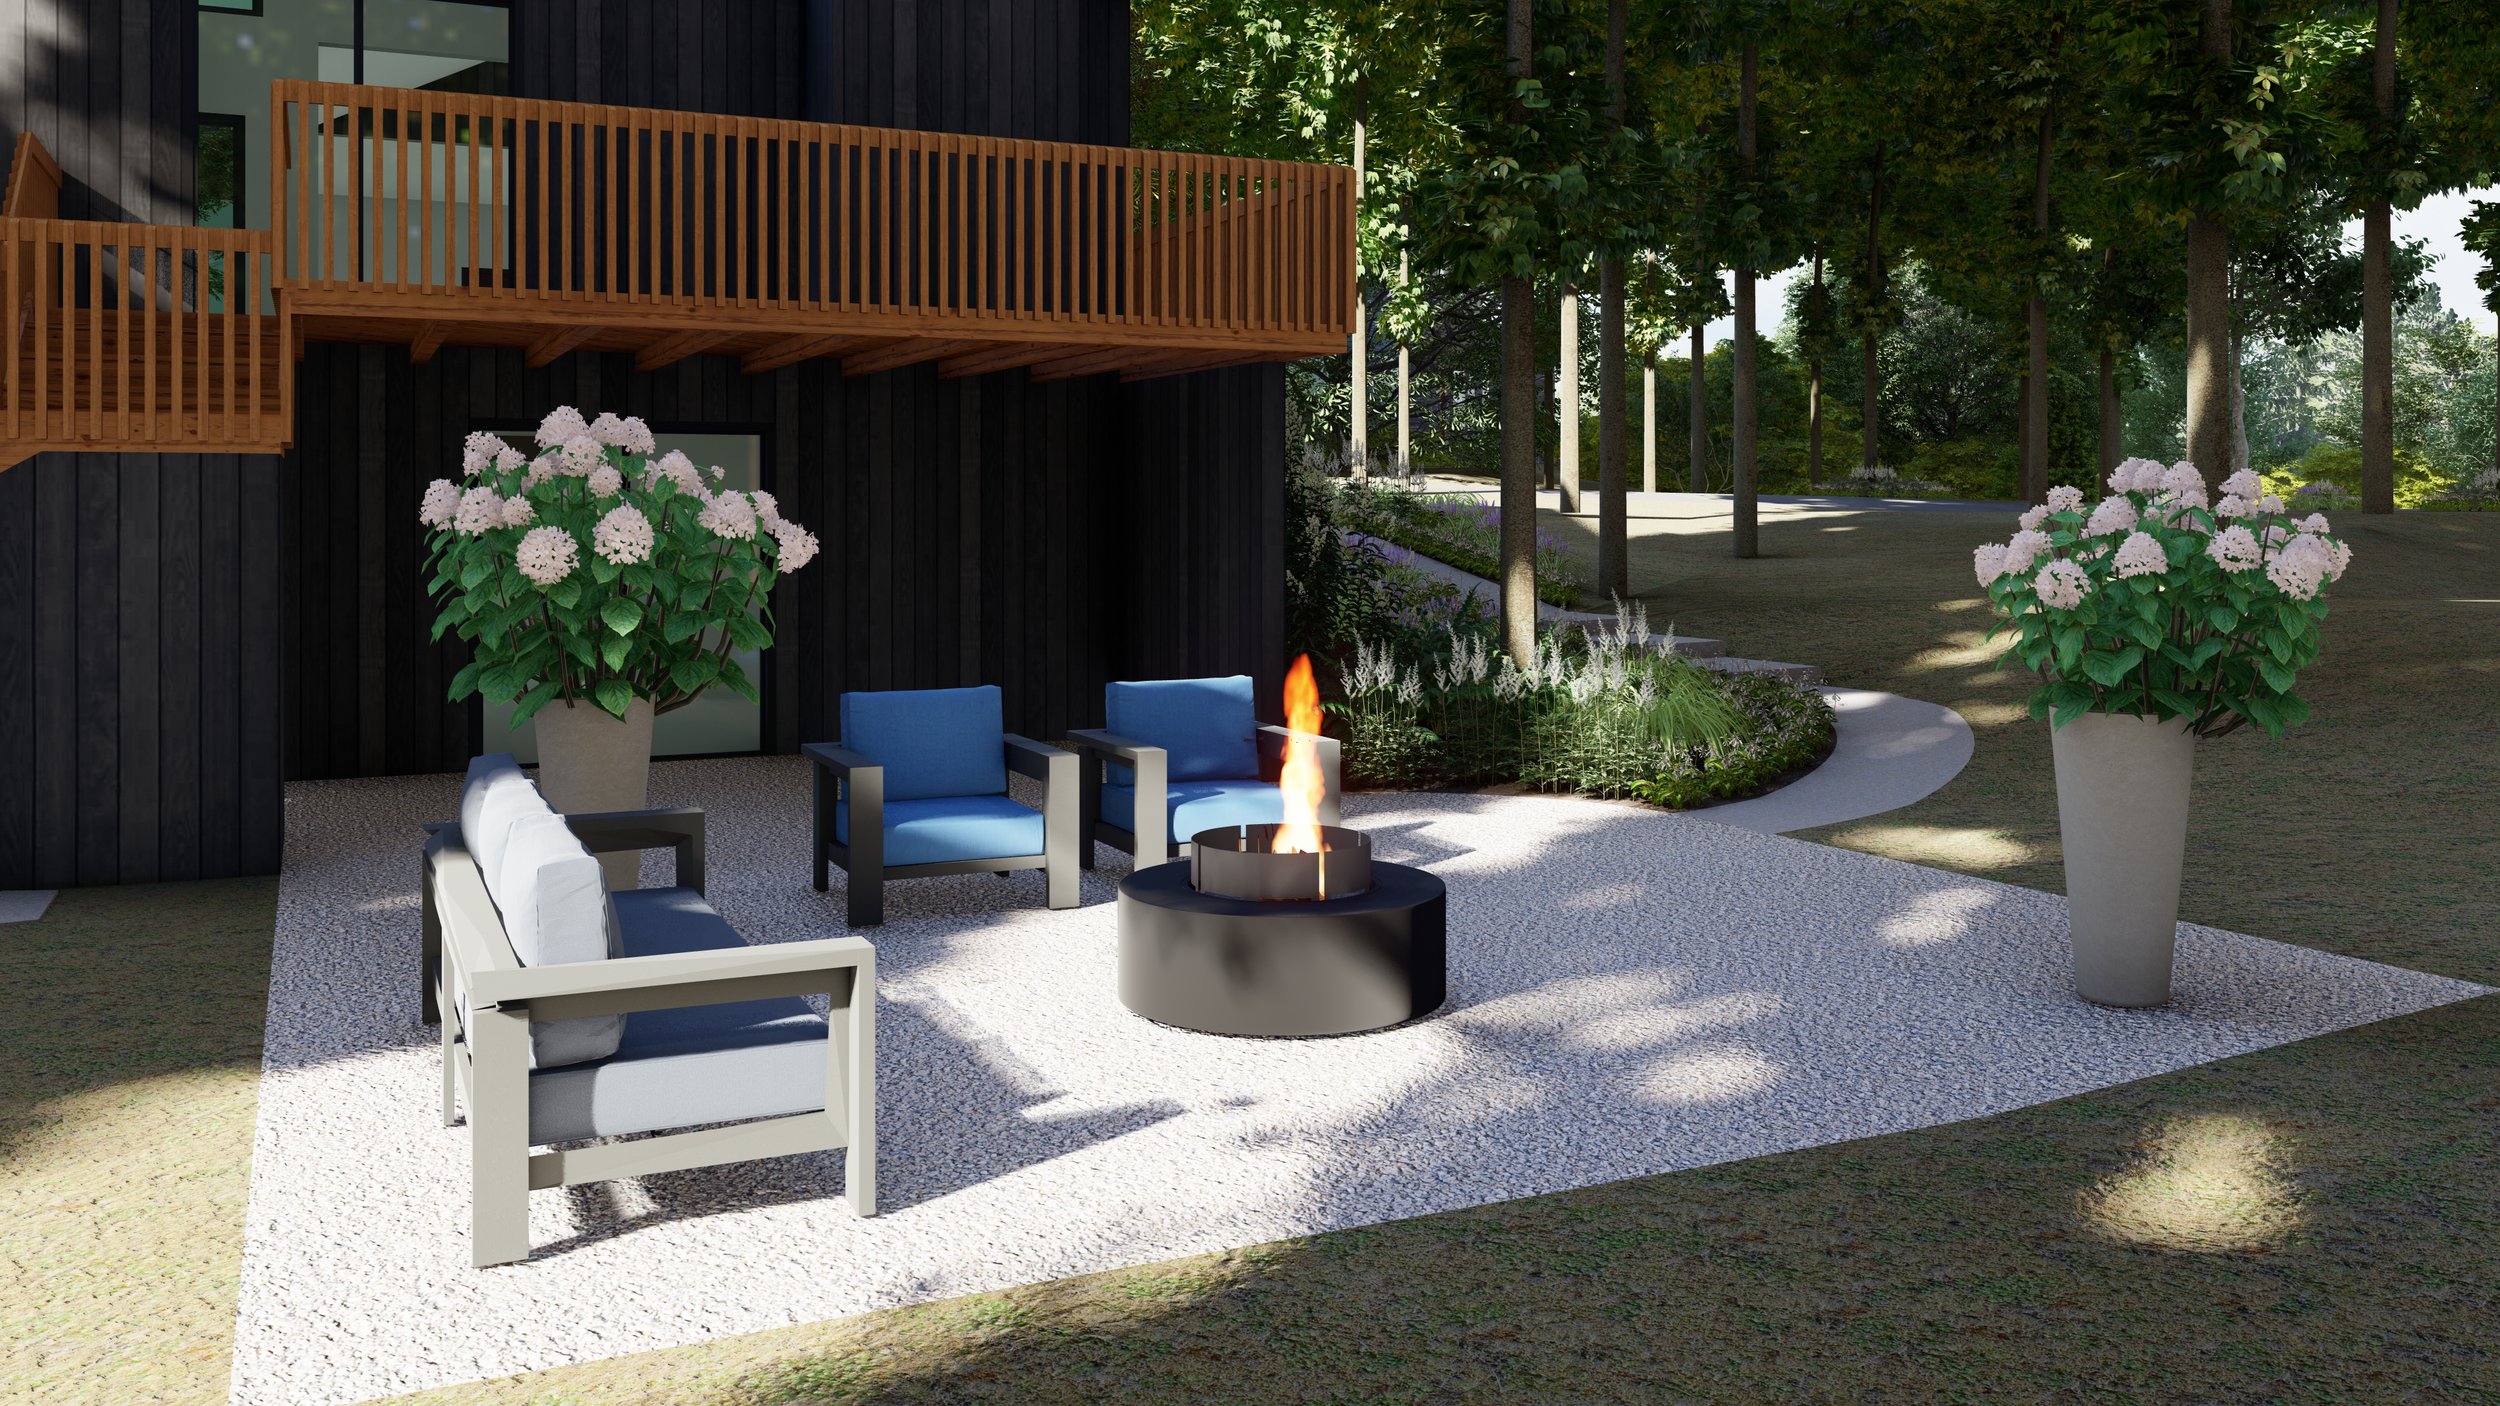 Gravel backyard seating area with round black metal fire pit, outdoor sofa, two lounge chairs, and hydrangeas in containers.